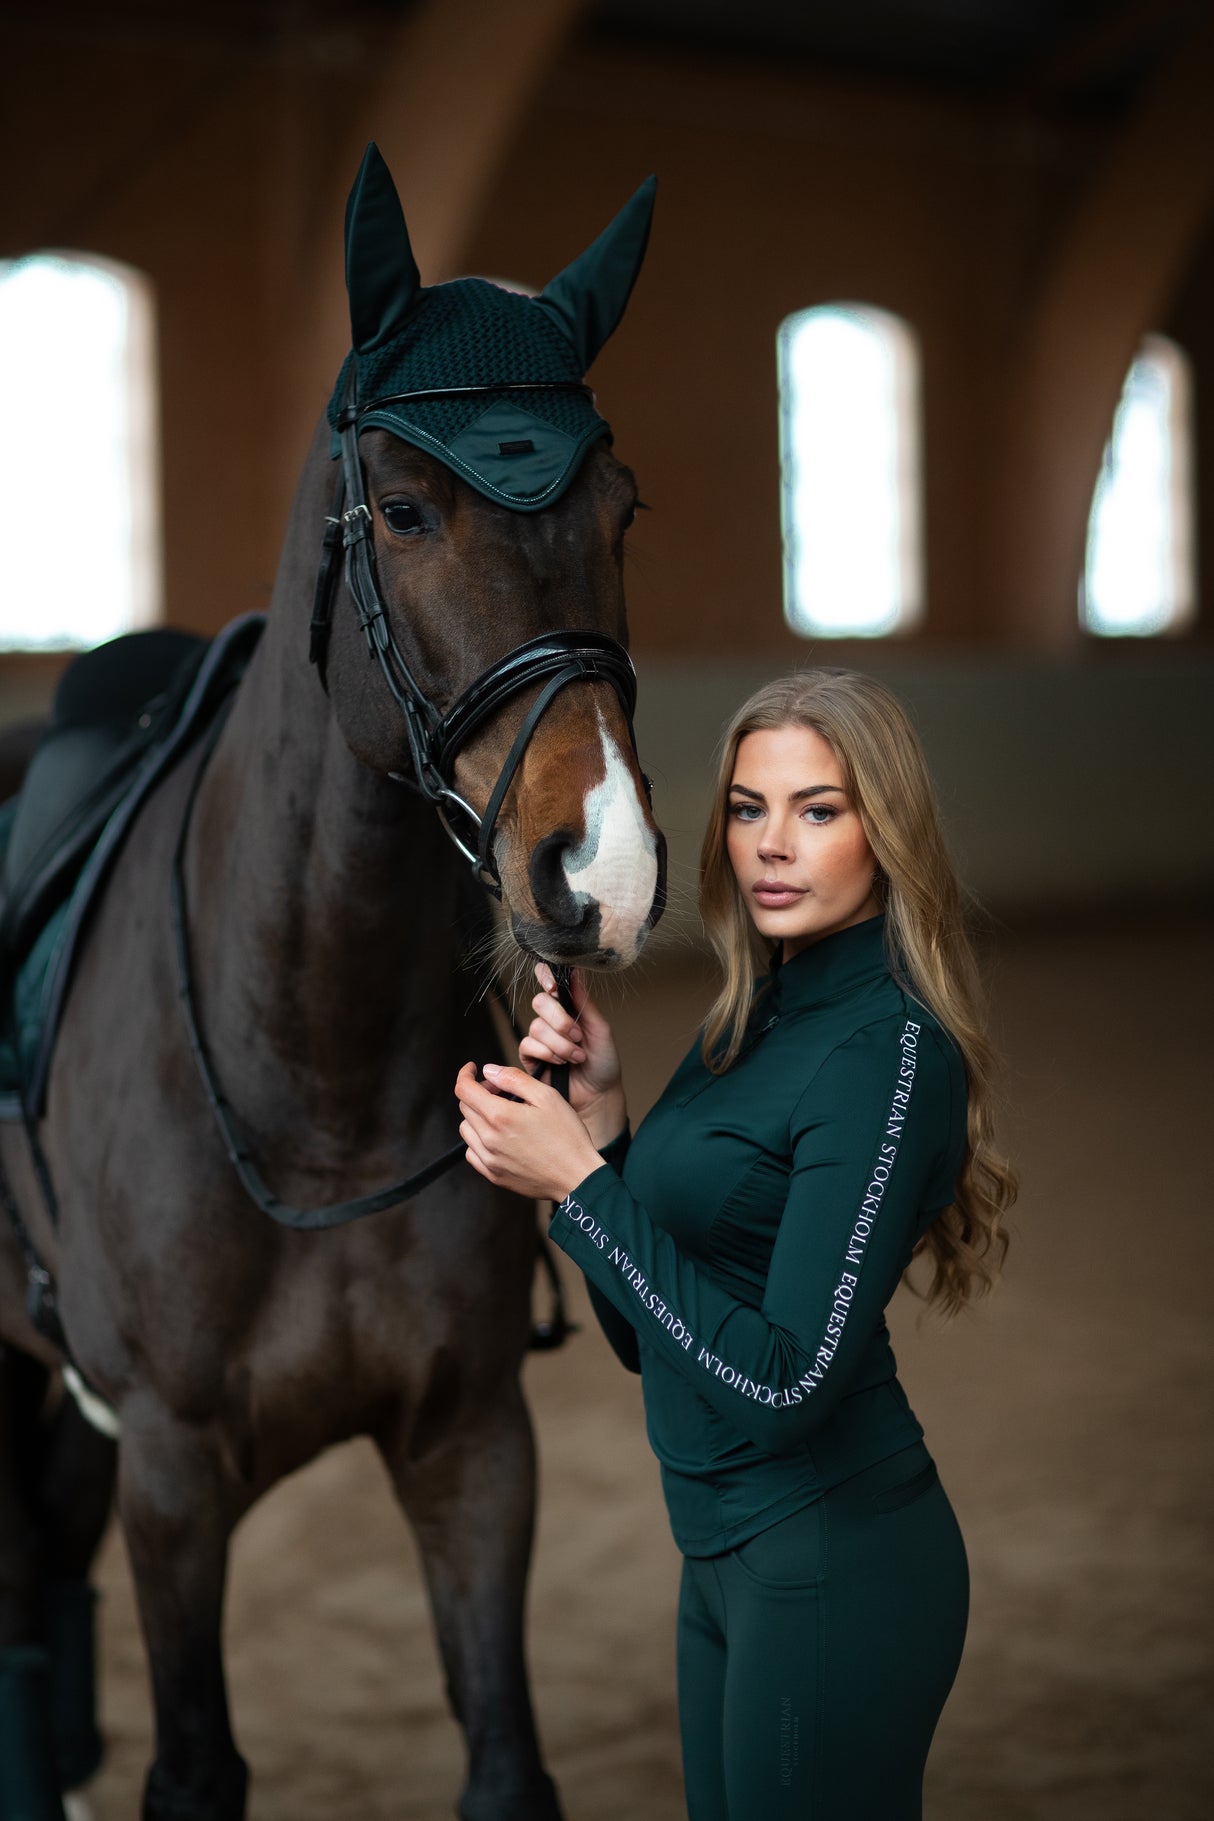 Equestrian Stockholm Power Base Layer Dramatic Monday